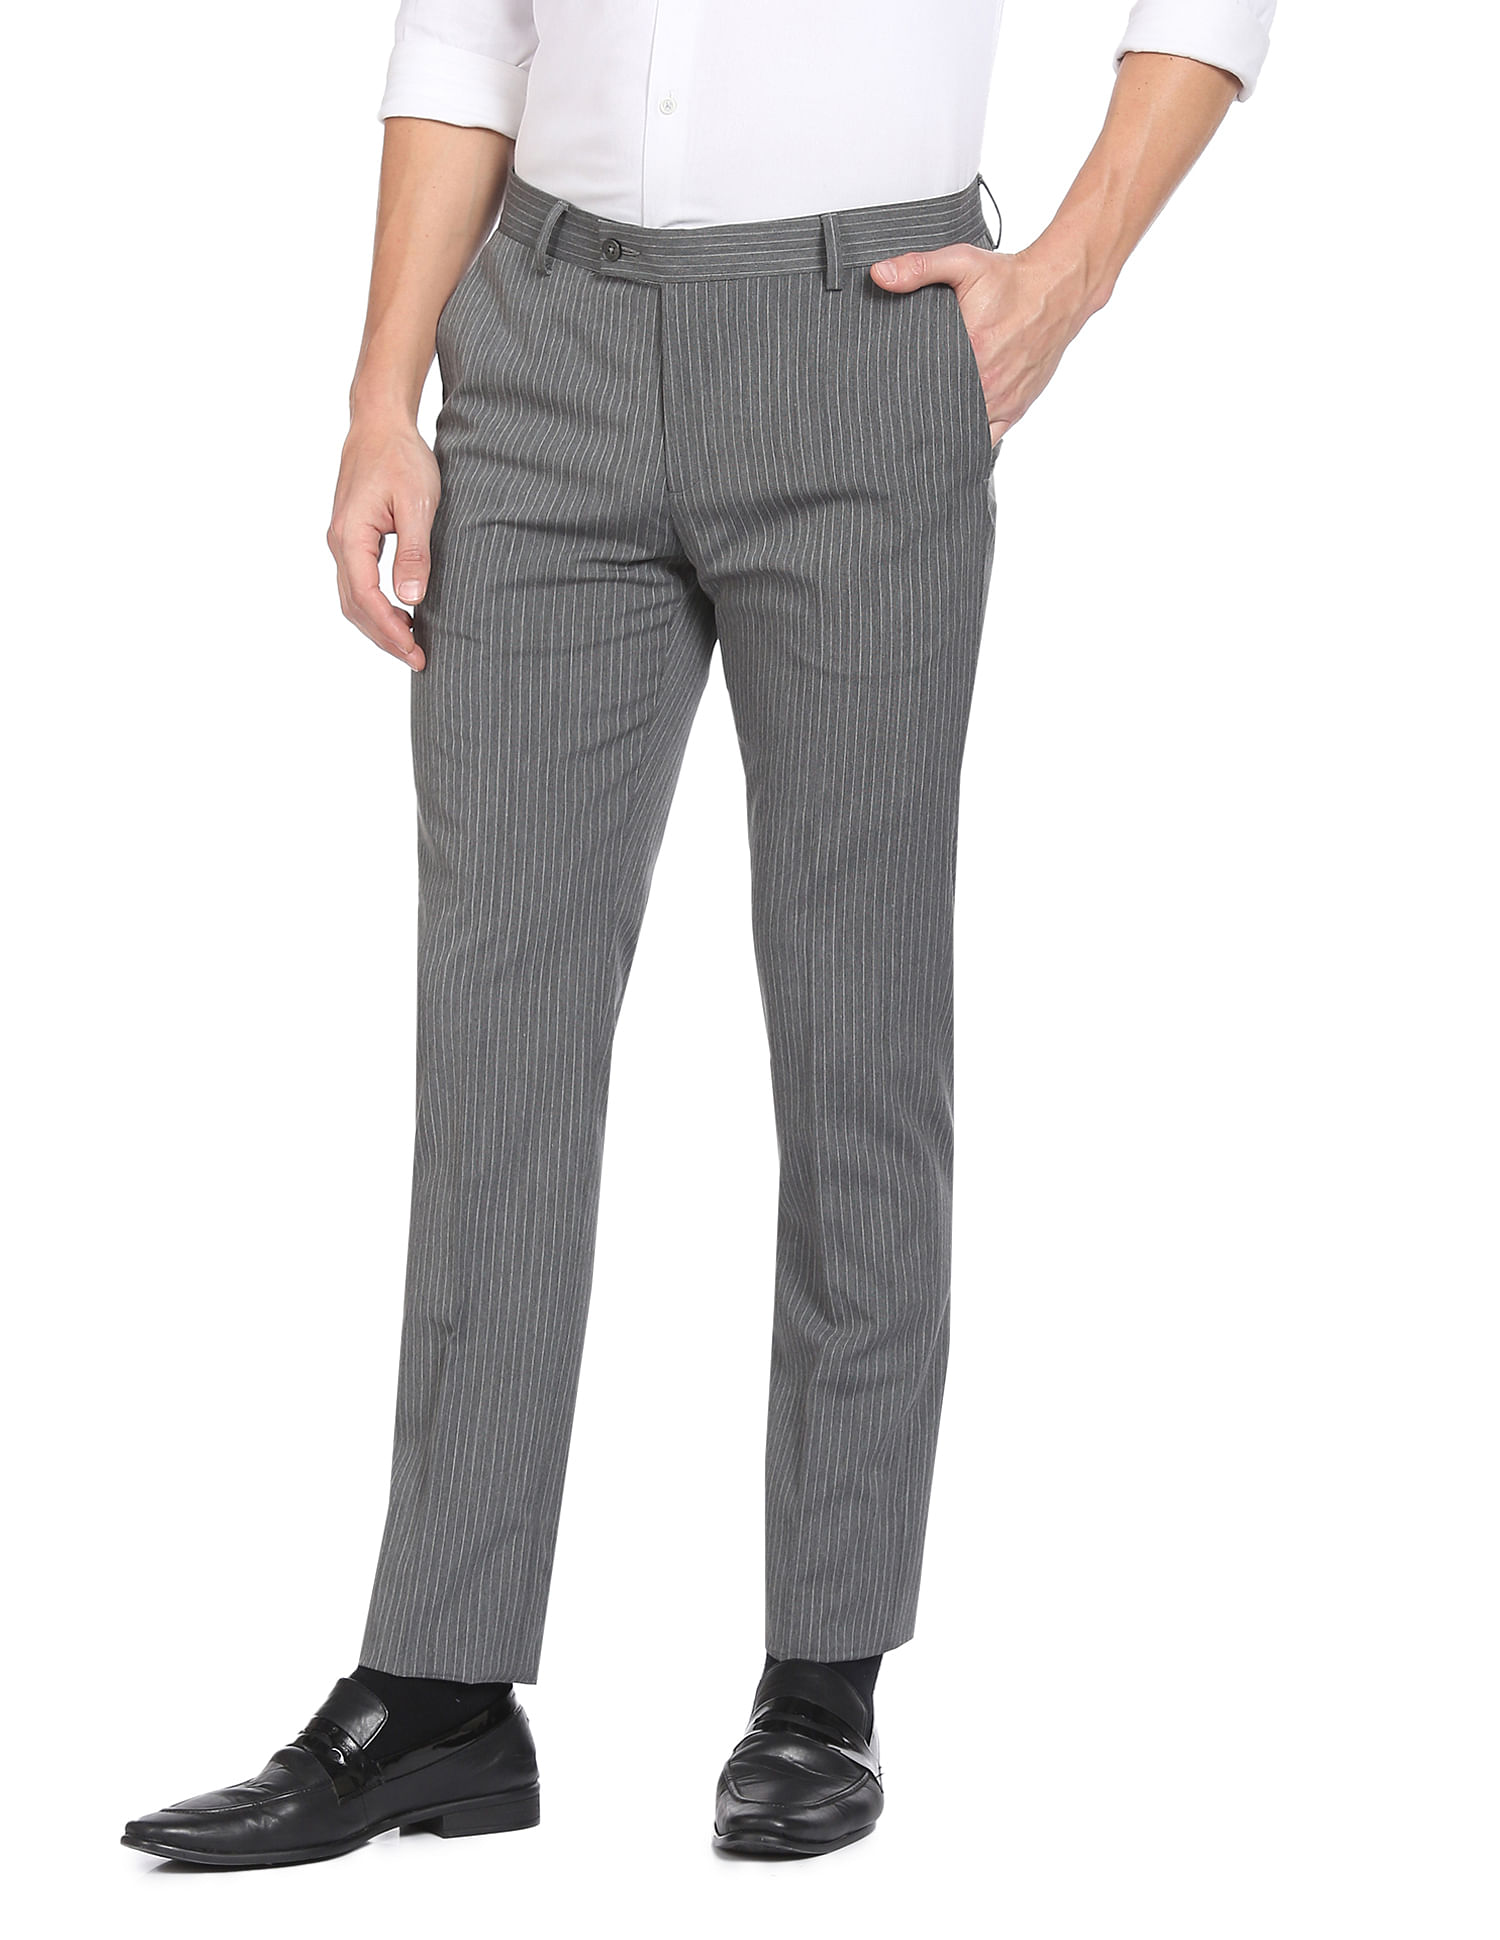 Grey Mid Rise Striped Pants